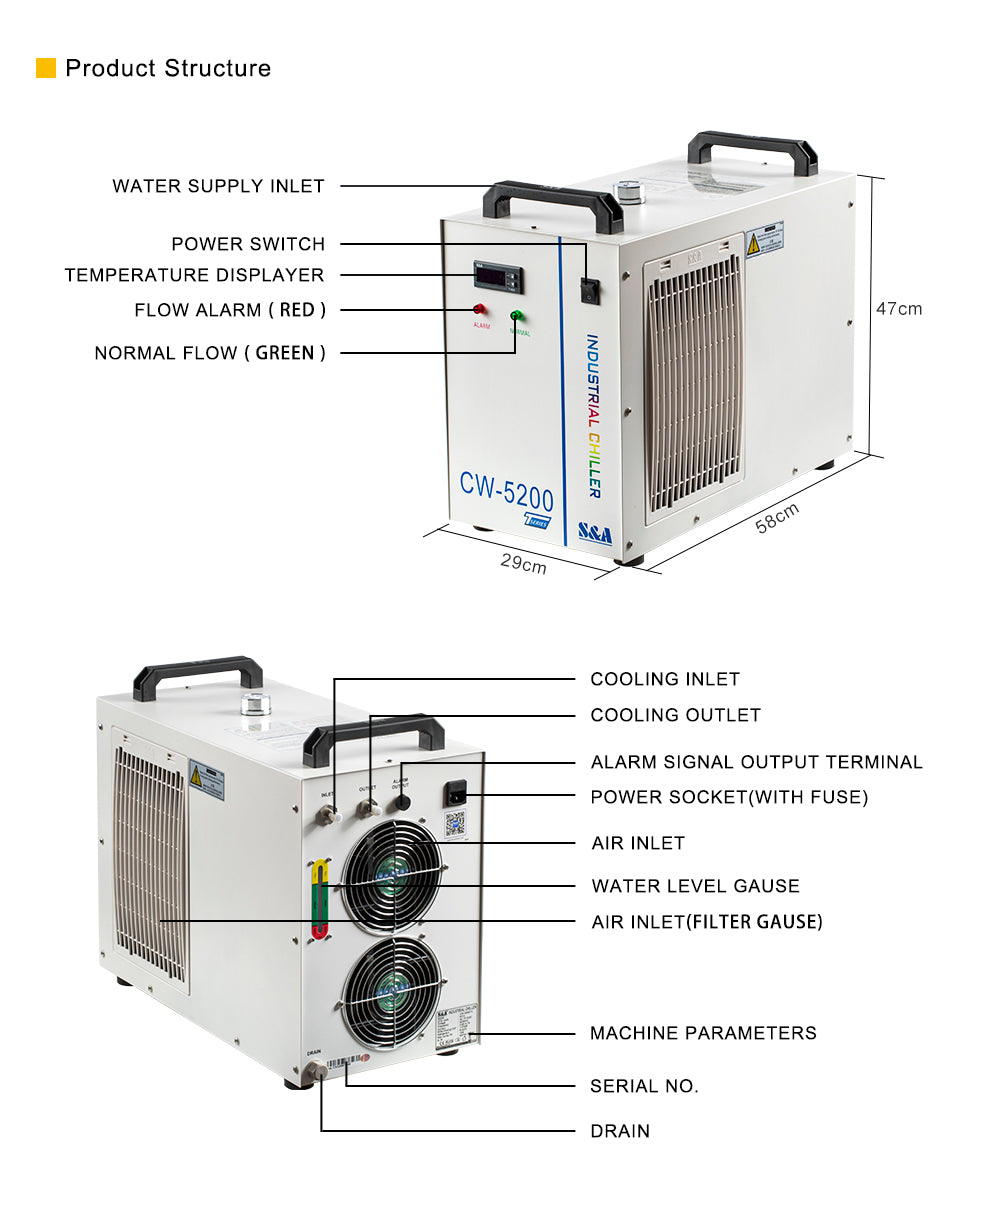 Raylasers S&A Industrial Chiller